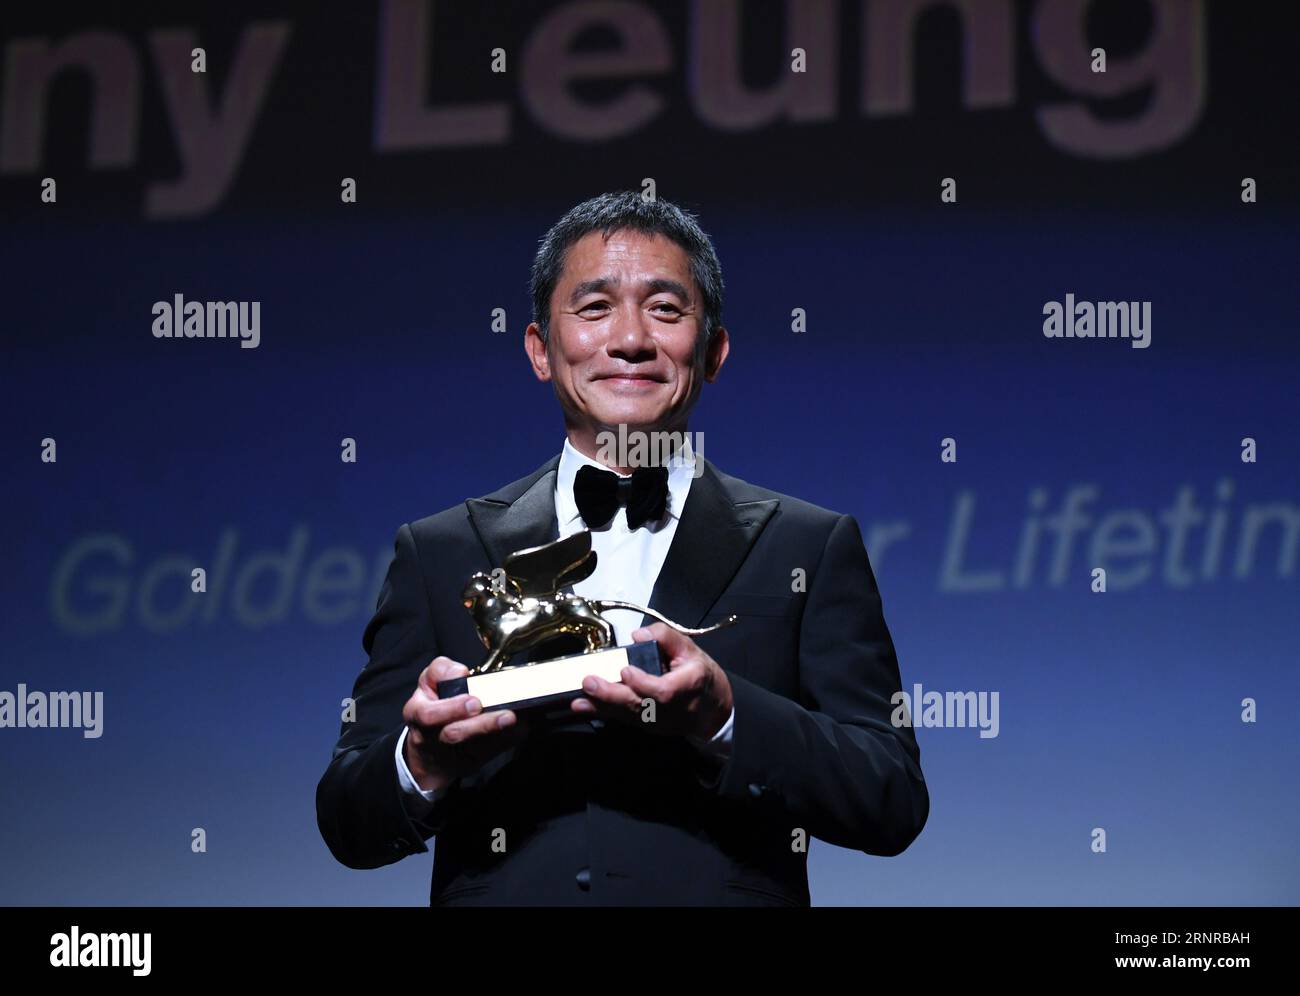 Venice, Italy. 2nd Sep, 2023. Actor Tony Leung Chiu-Wai poses with his trophy at an award ceremony during the 80th Venice International Film Festival in Venice, Italy, on Sept. 2, 2023. Tony Leung Chiu-Wai of Hong Kong, China was presented with the Golden Lion for Lifetime Achievement during the event on Saturday. Credit: Jin Mamengni/Xinhua/Alamy Live News Stock Photo